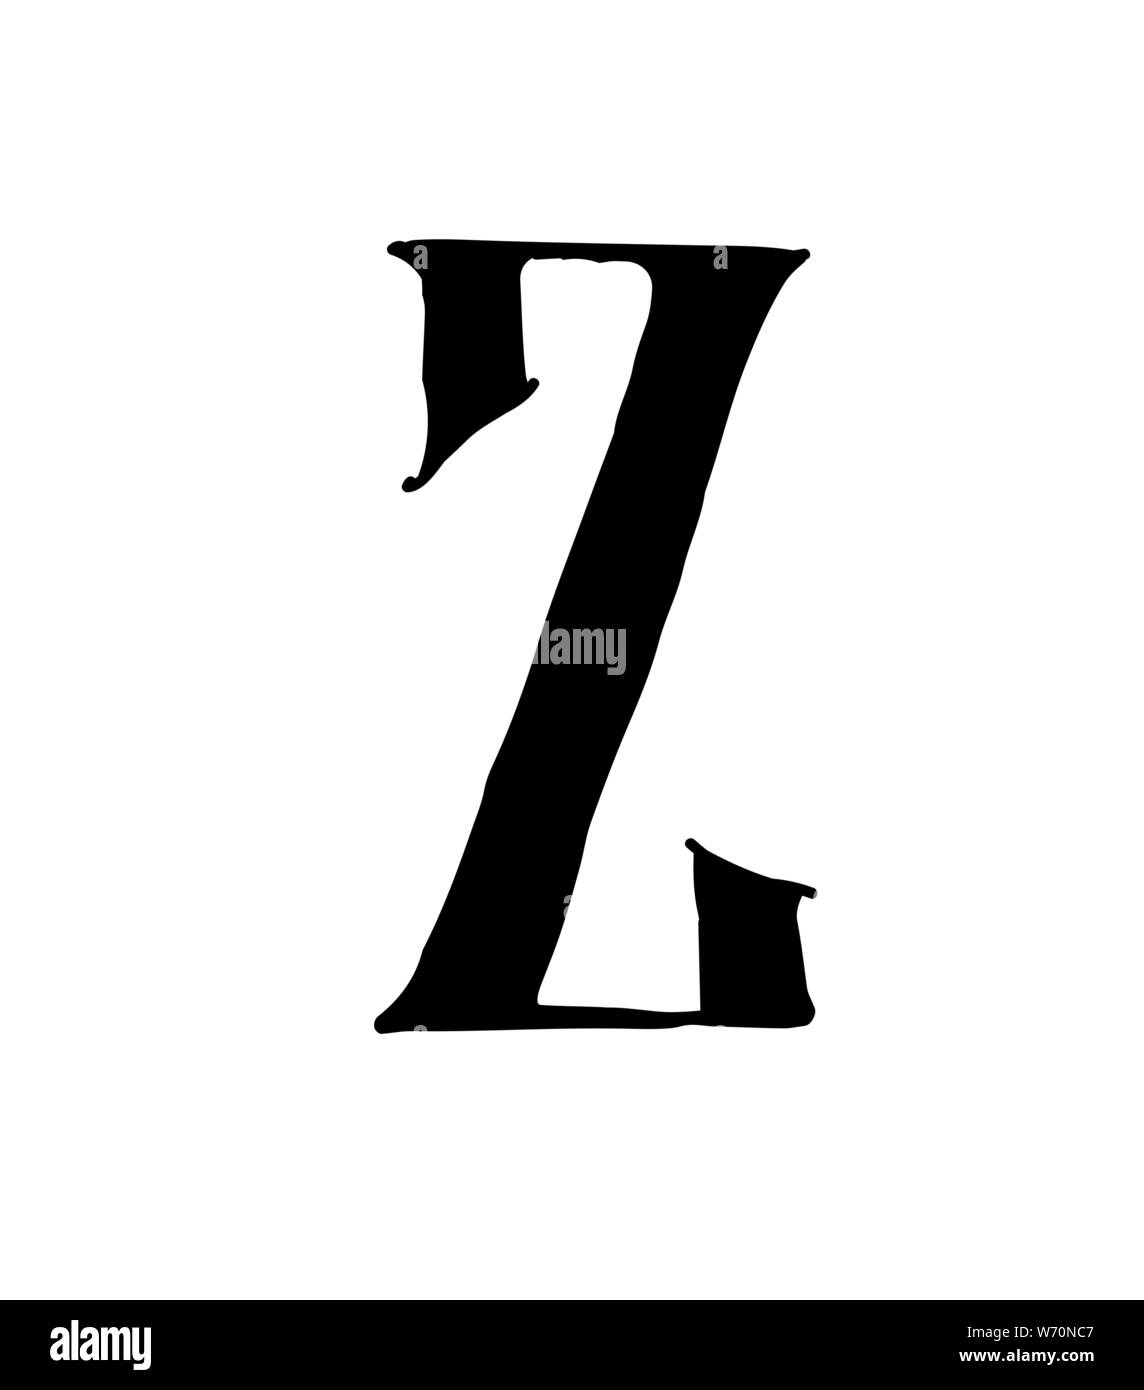 Z letter Black and White Stock Photos & Images - Alamy